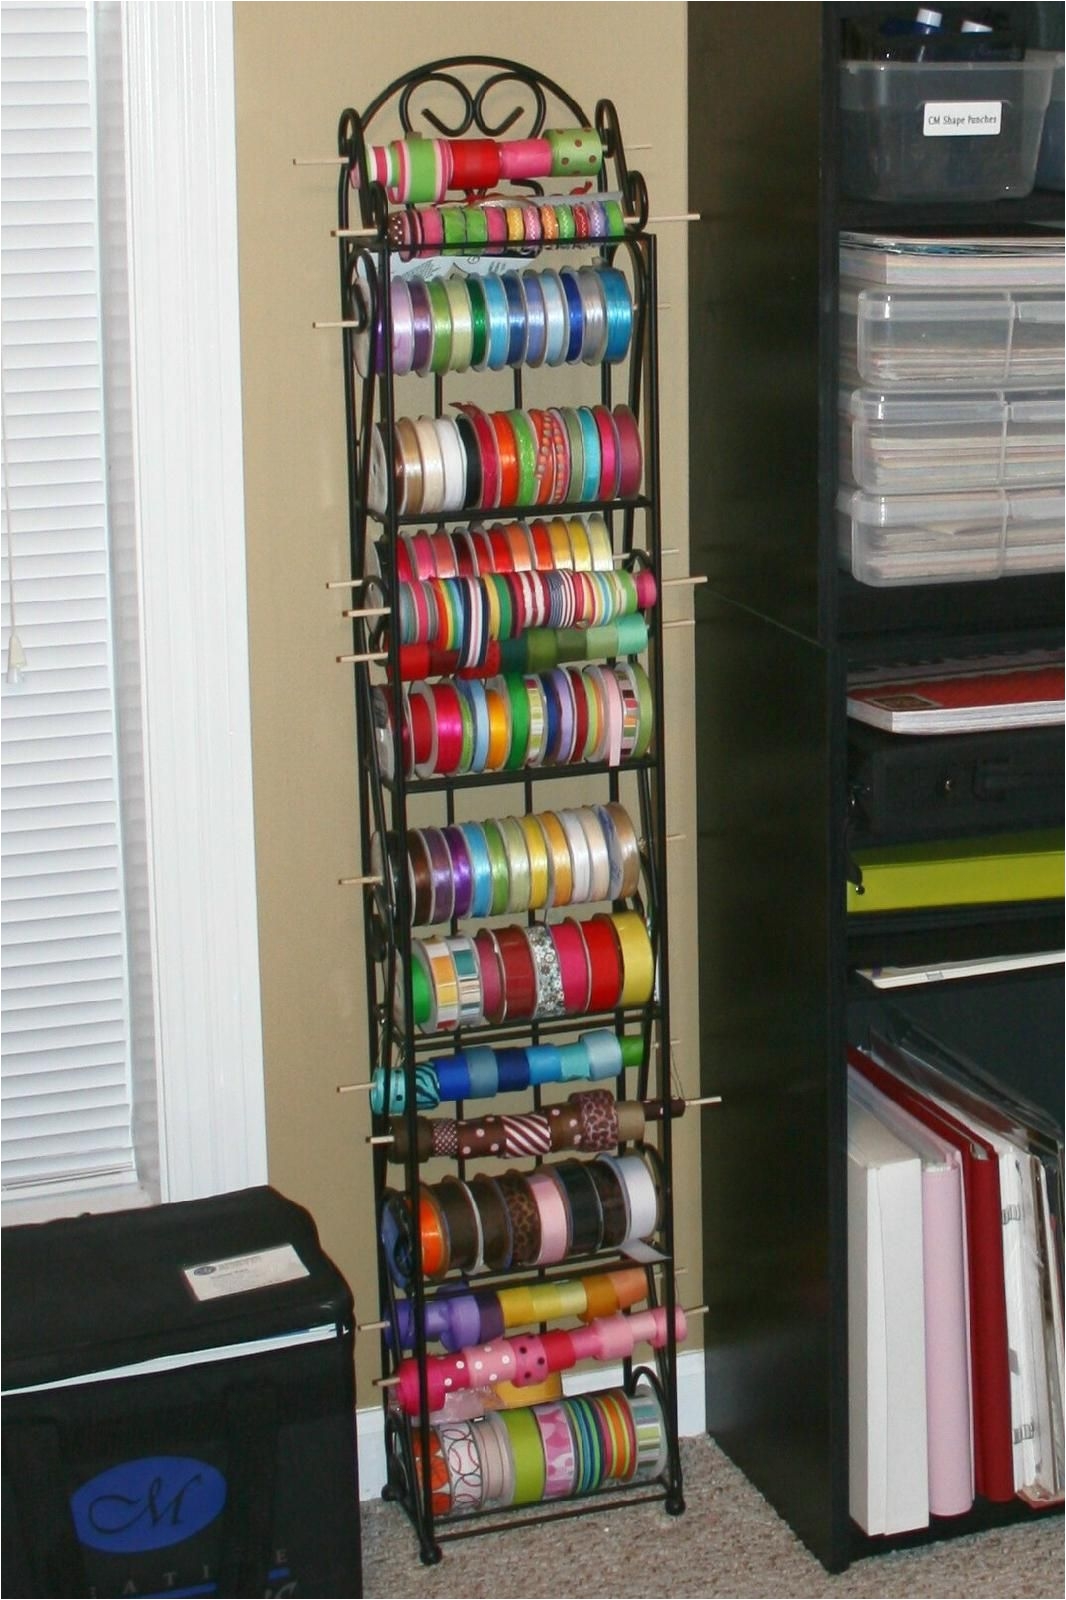 i soo need to do something like this with all my ribbon using a wine rack for ribbon storage